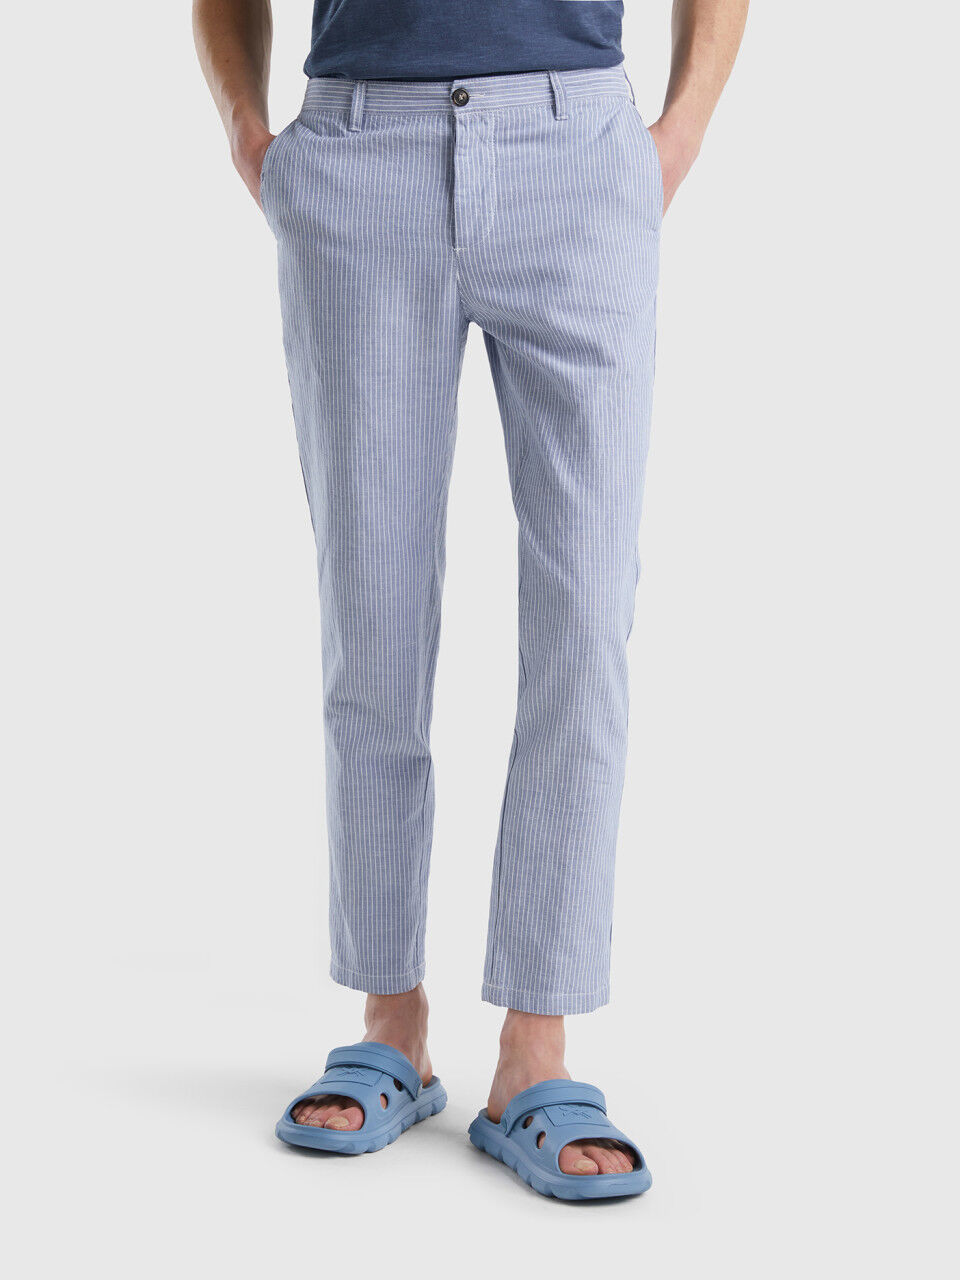 Buy Blue Trousers & Pants for Men by JOHN PLAYERS Online | Ajio.com